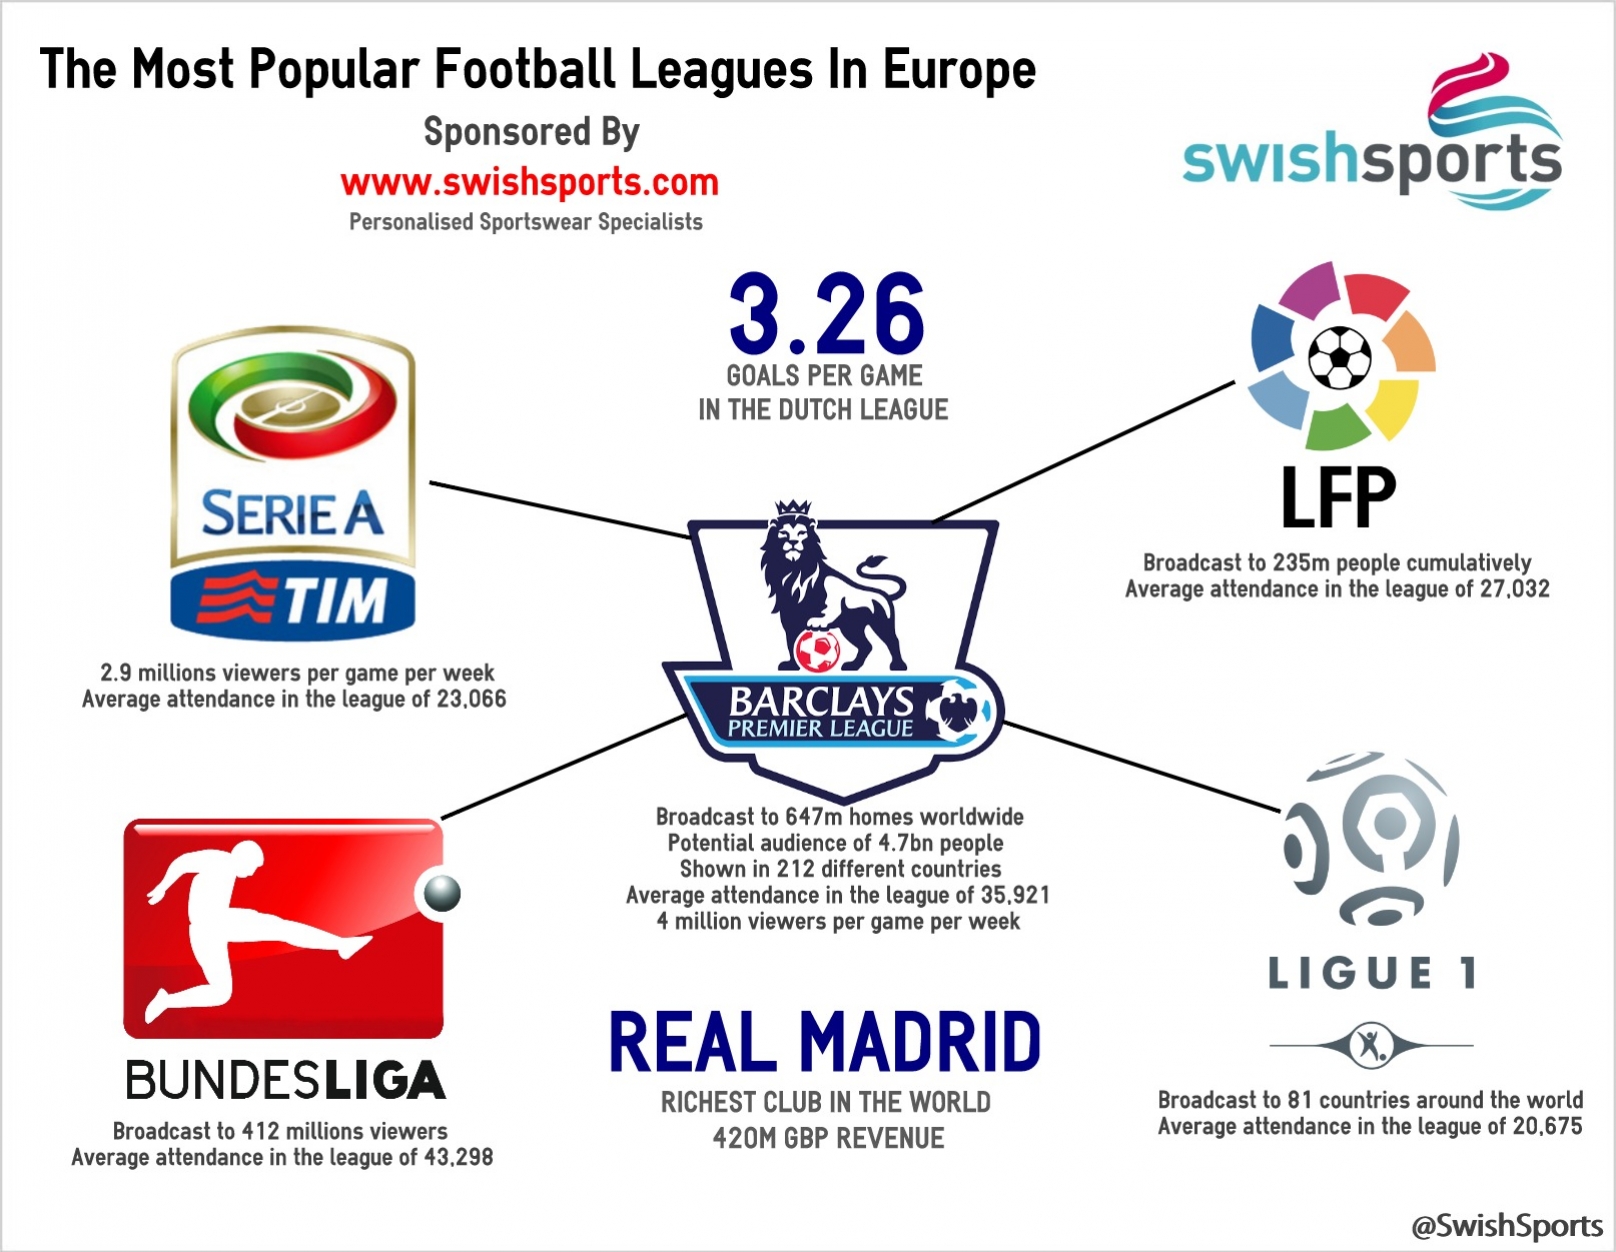 The Most Popular Football Leagues In Europe Visual Ly